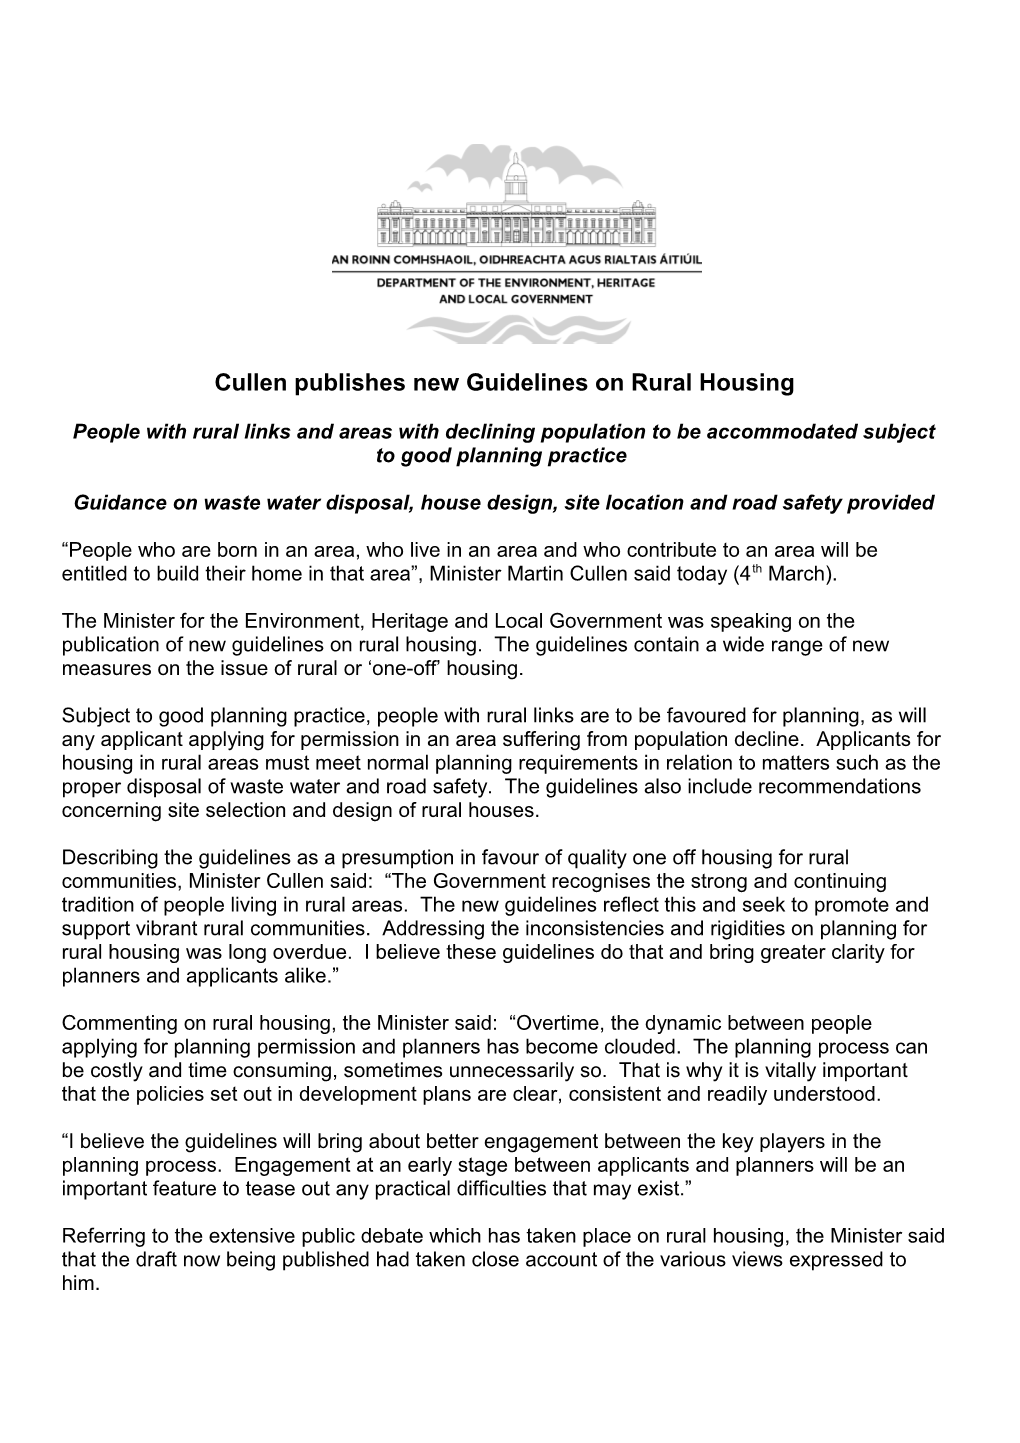 Cullen Publishes New Guidelines on Rural Housing